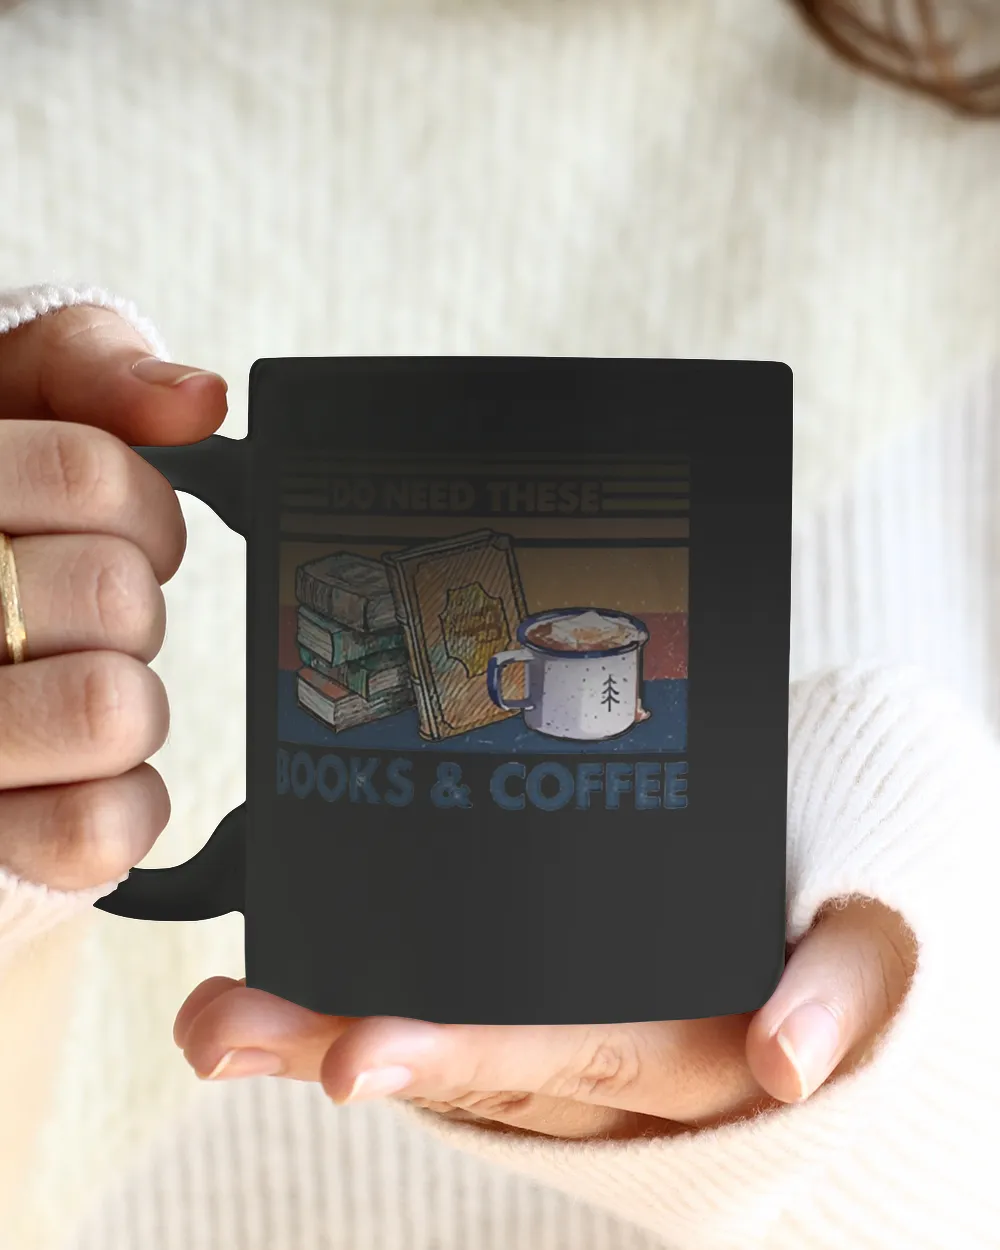 Book Reader Yes I really do need these booksbooks and coffee 33 Reading Library